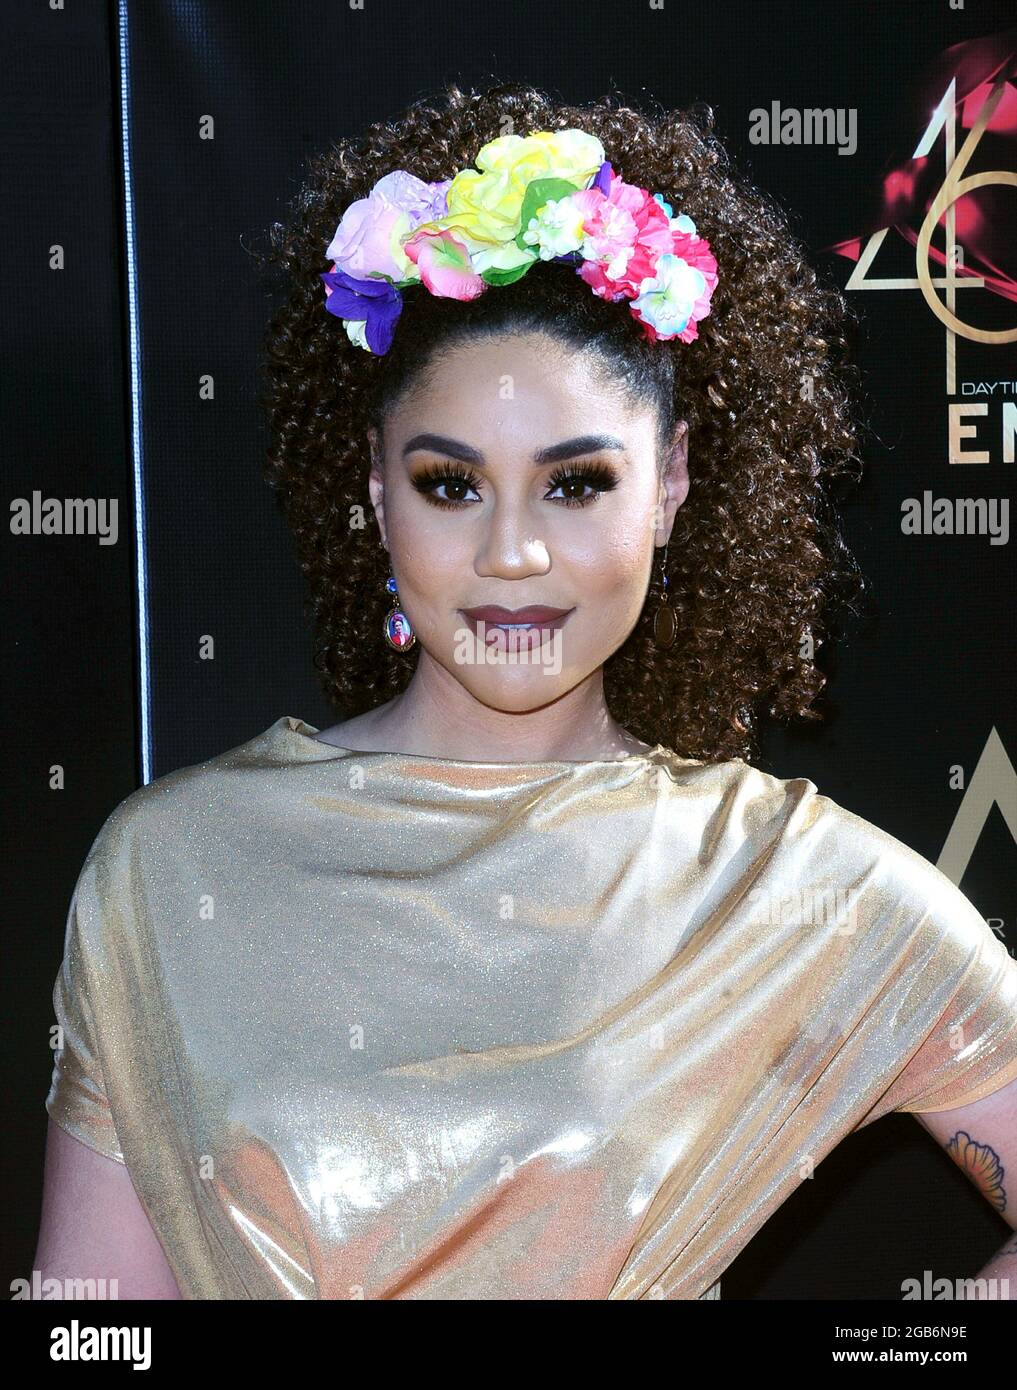 Los Angeles - CA -20190503 Arrivals at the 46th Annual Daytime Creative Arts Emmy Awards.   -PICTURED: Joy Villa Sara De Boer Stock Photo